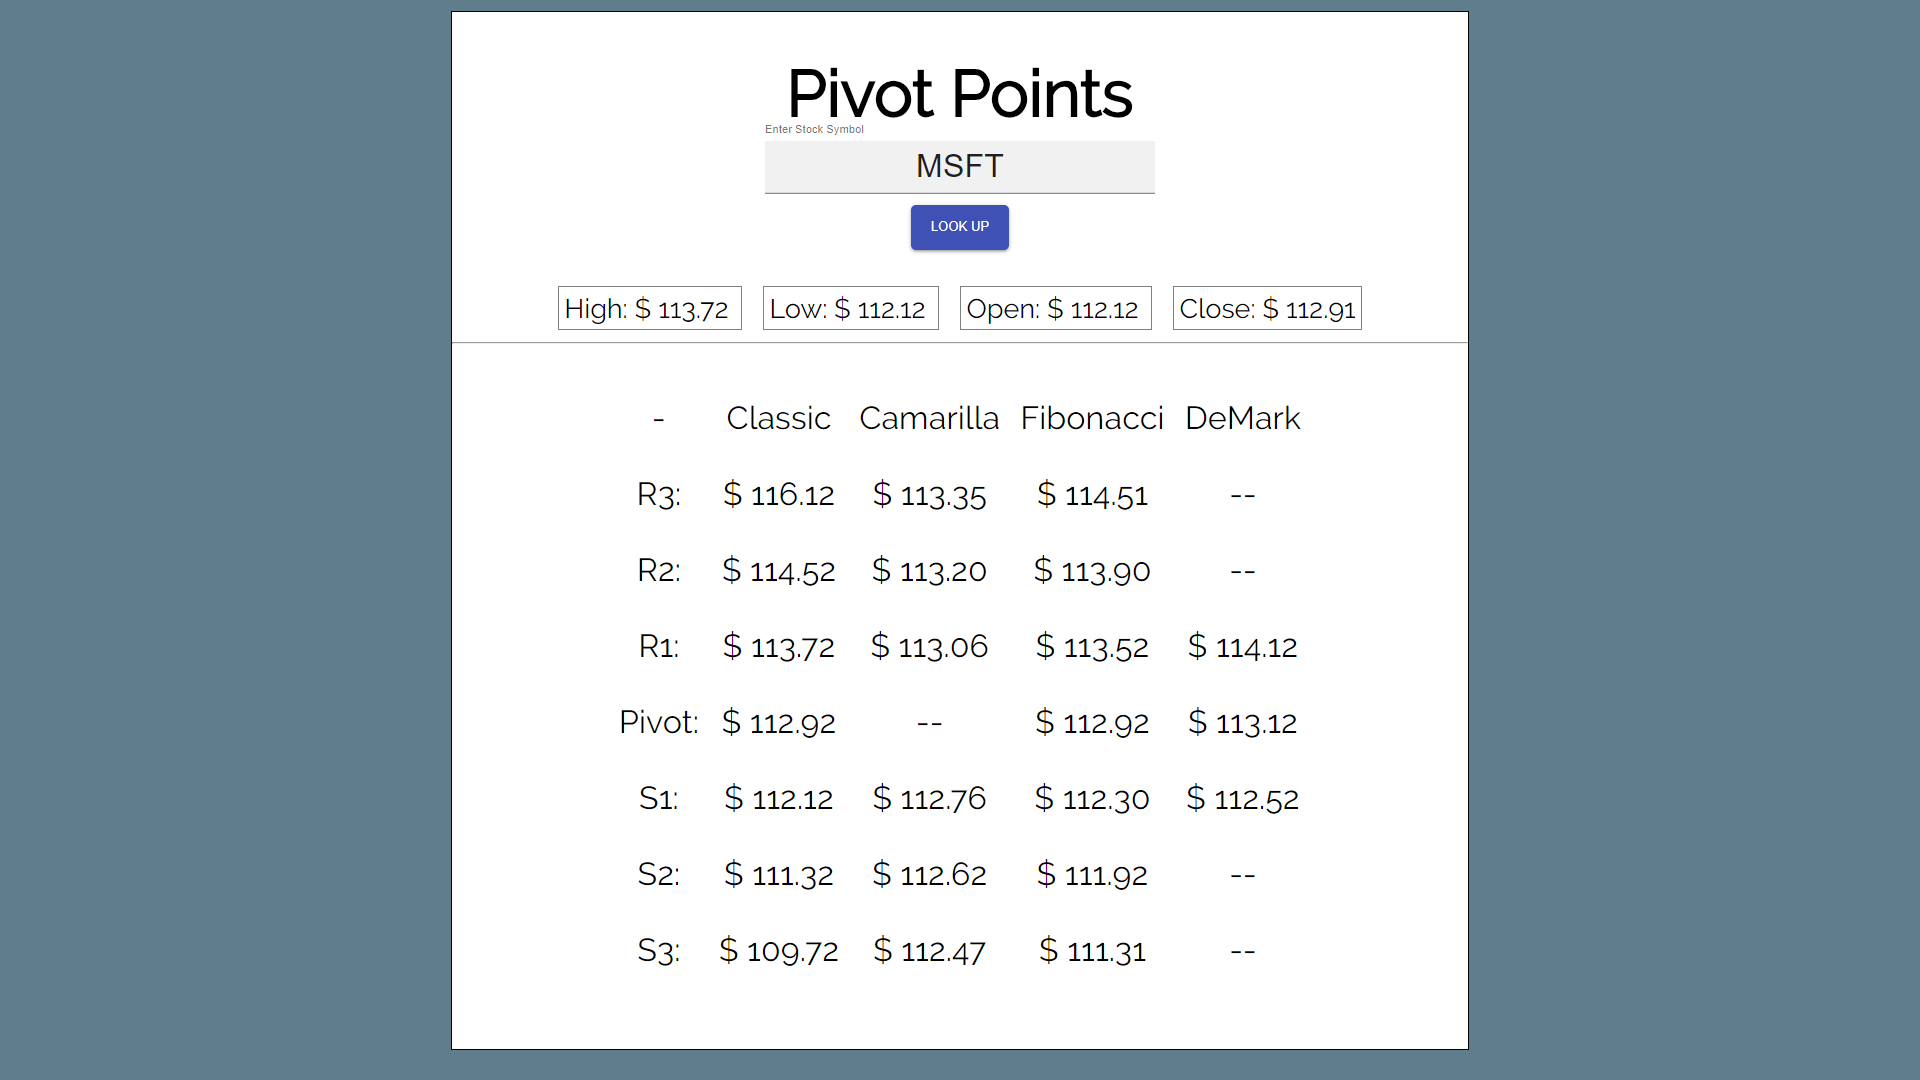 Pivot Points will automatically generate